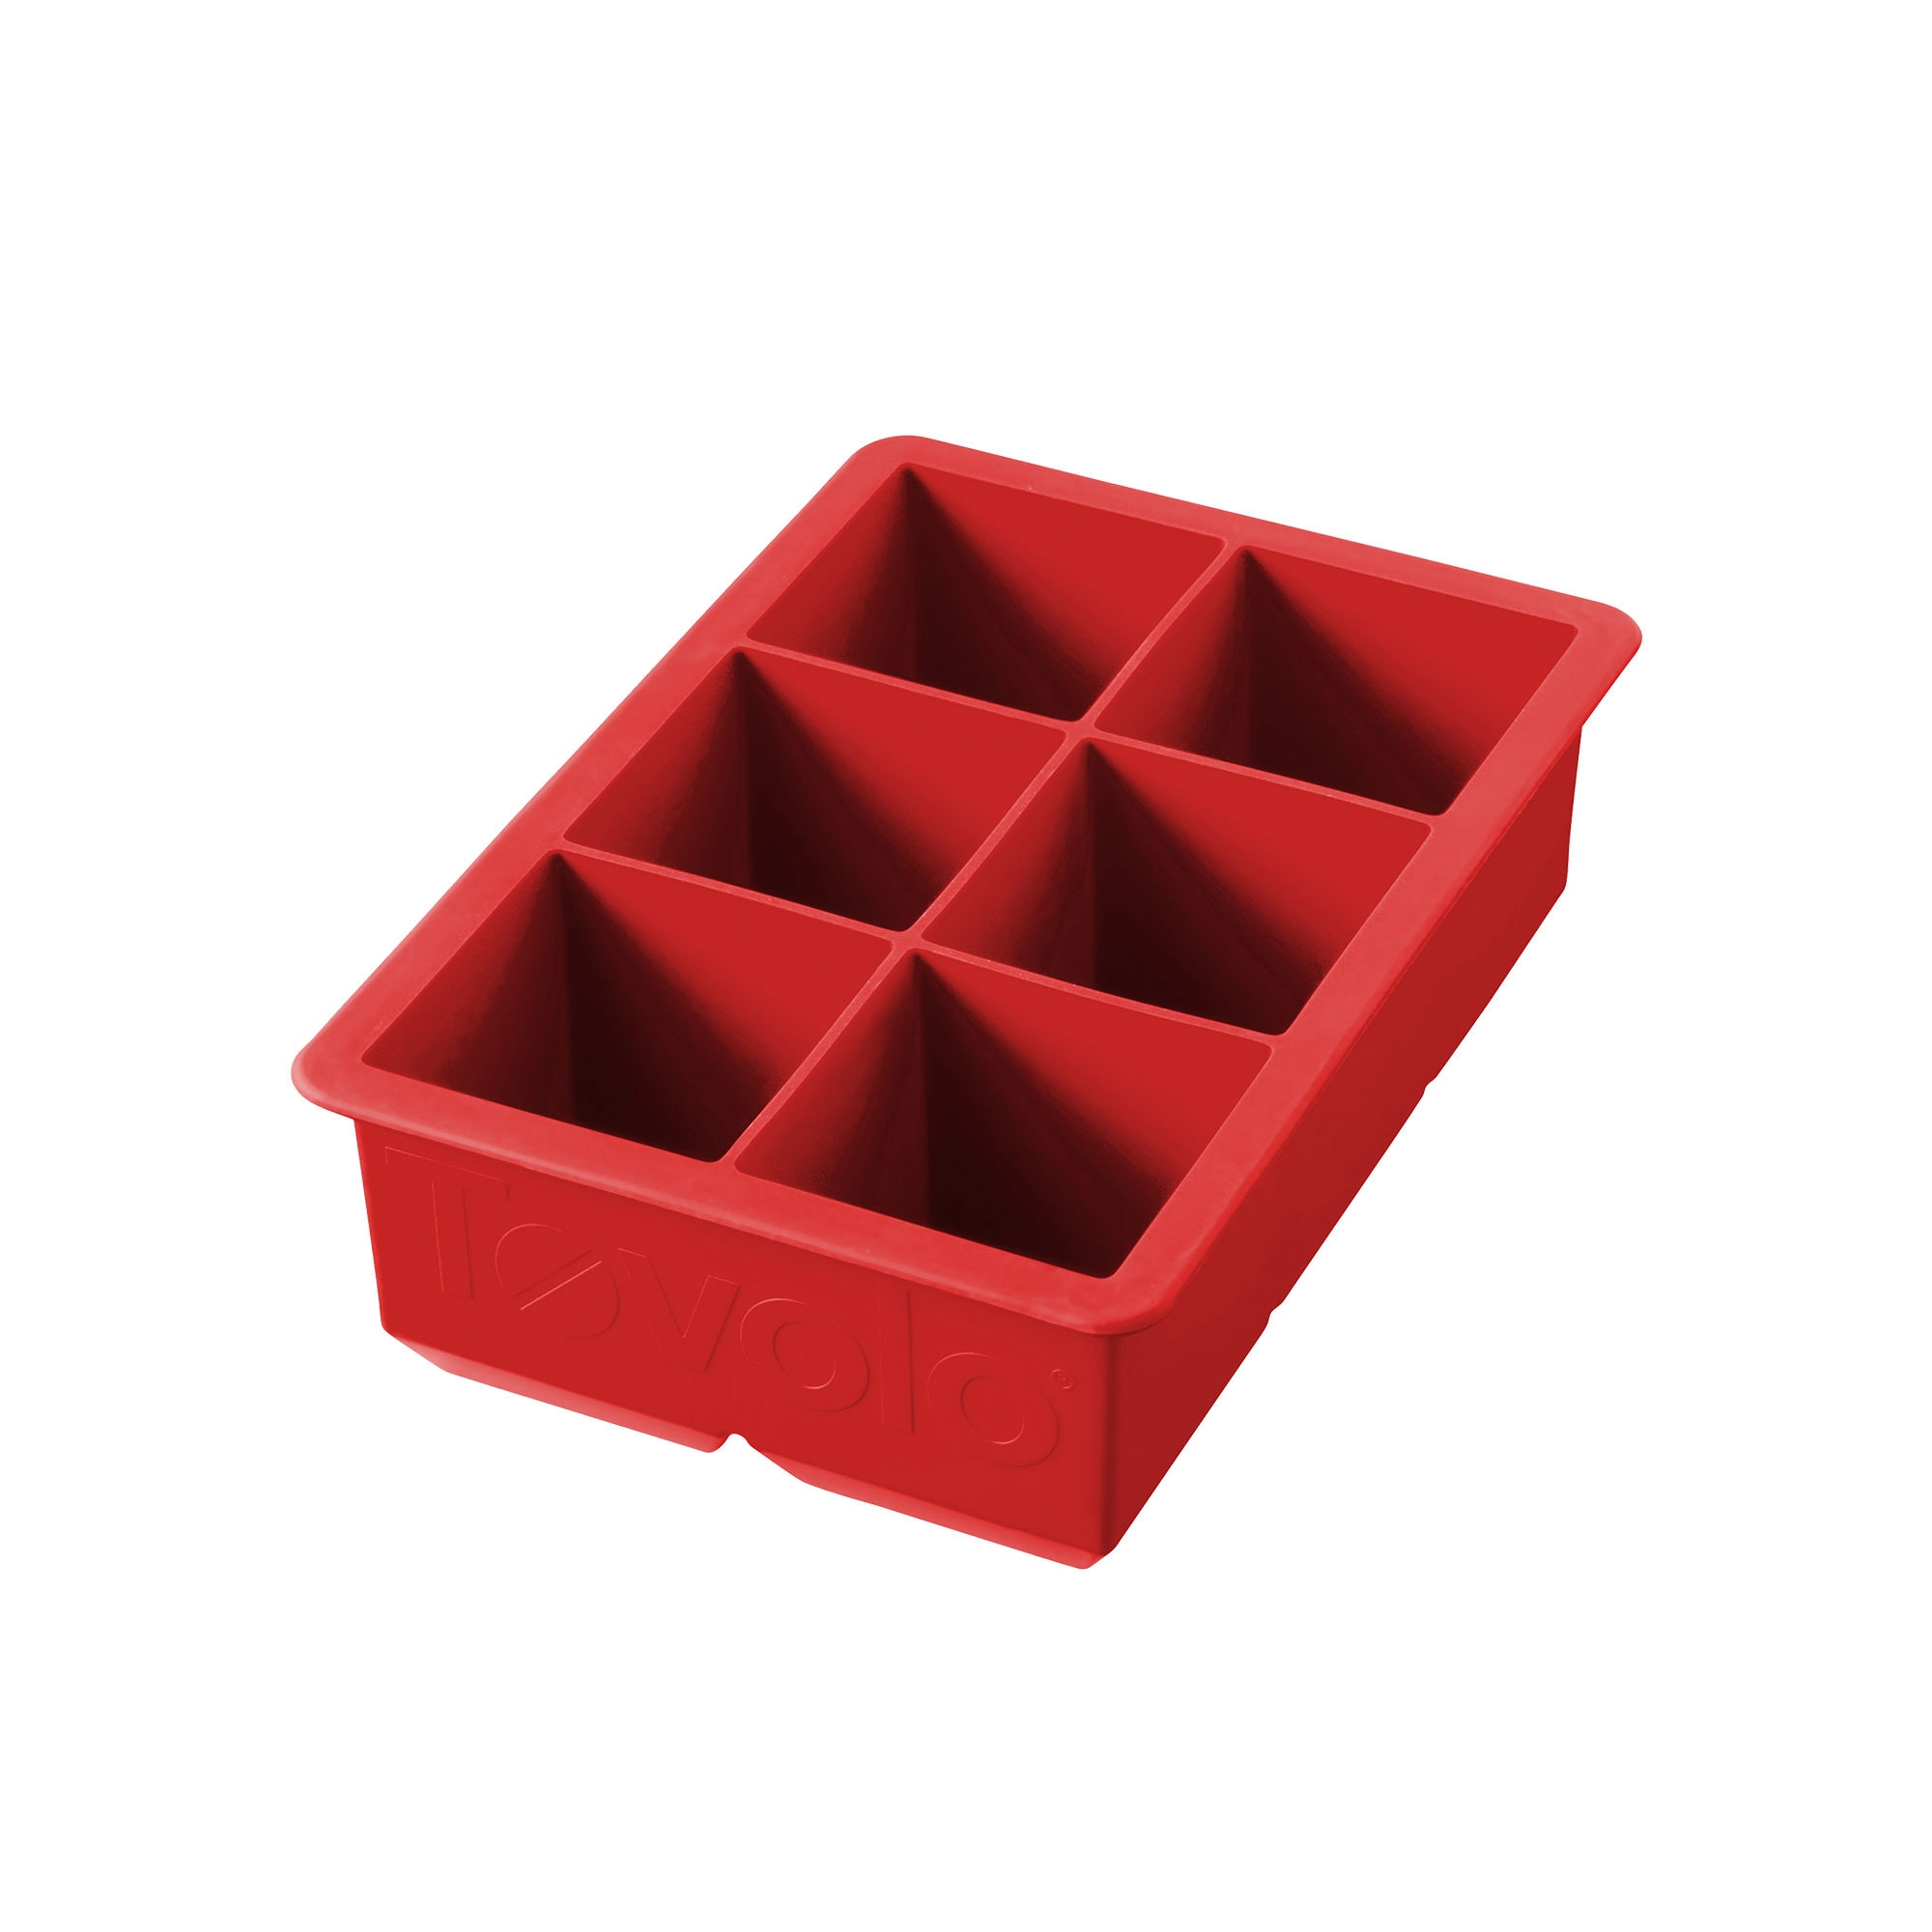 Tovolo 6 Cube Ice Tray Red Image 1